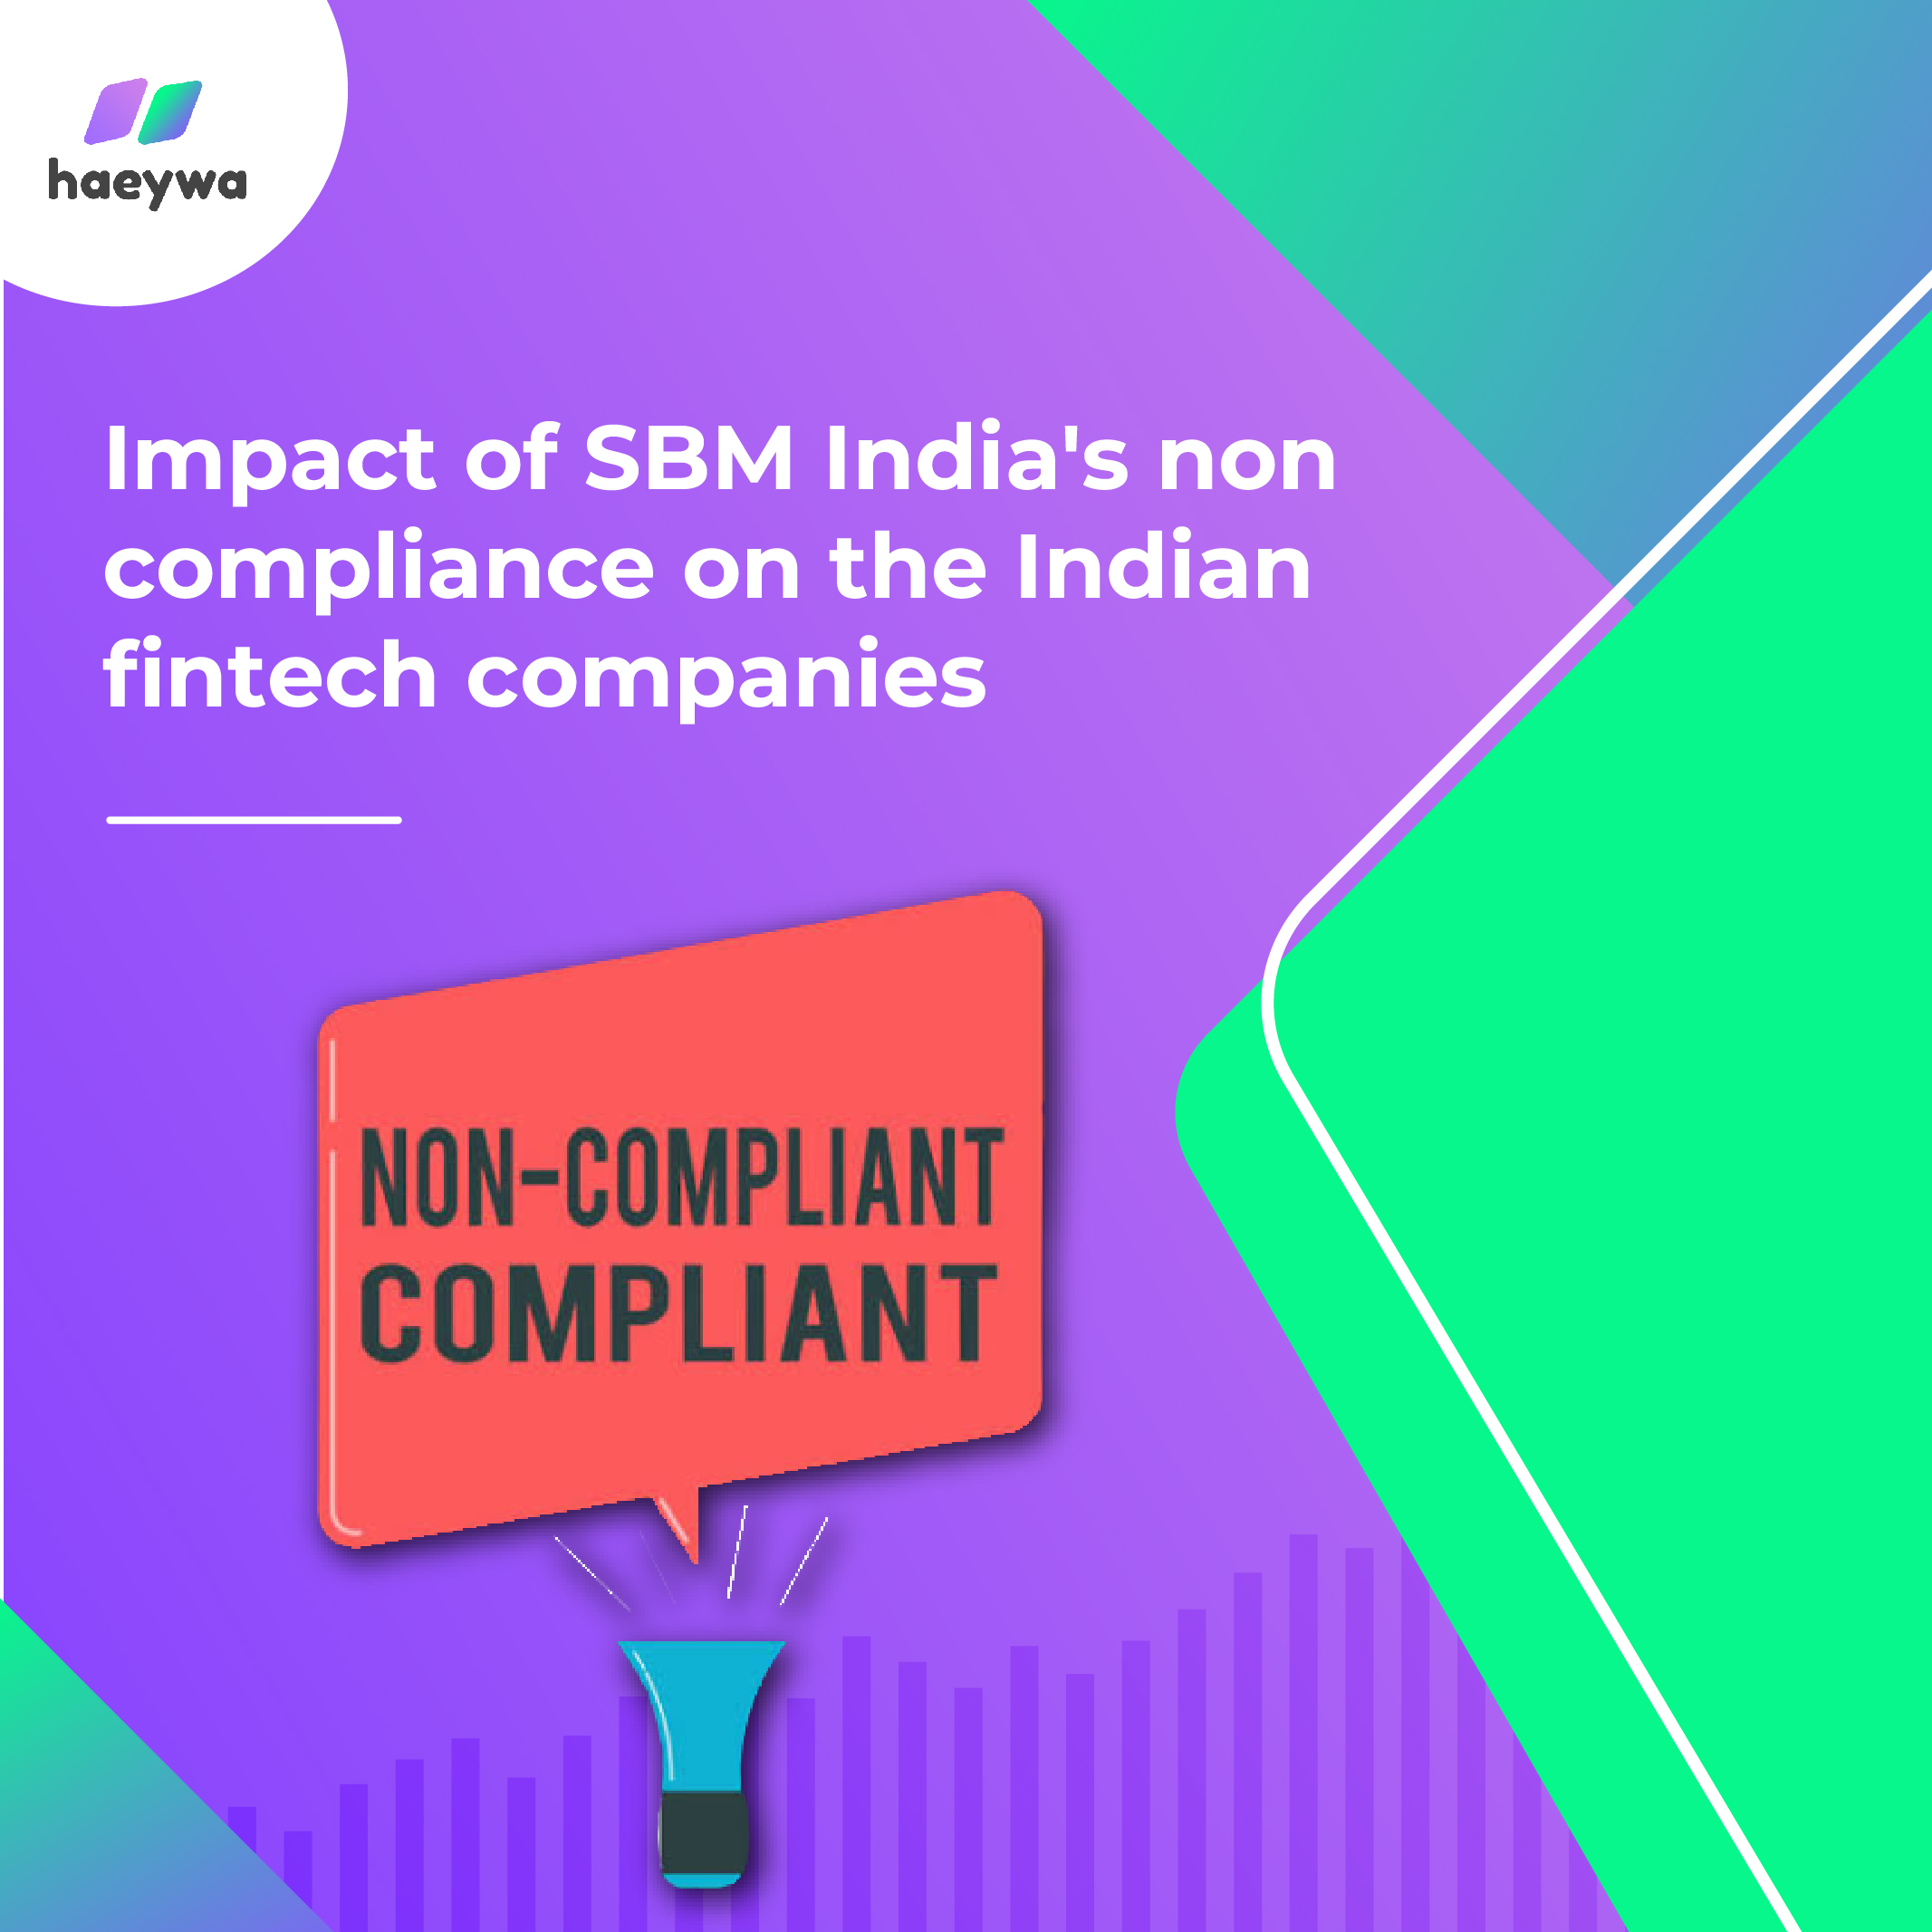 The Impact of SBM Bank's Non-Compliance on Indian Fintech Companies